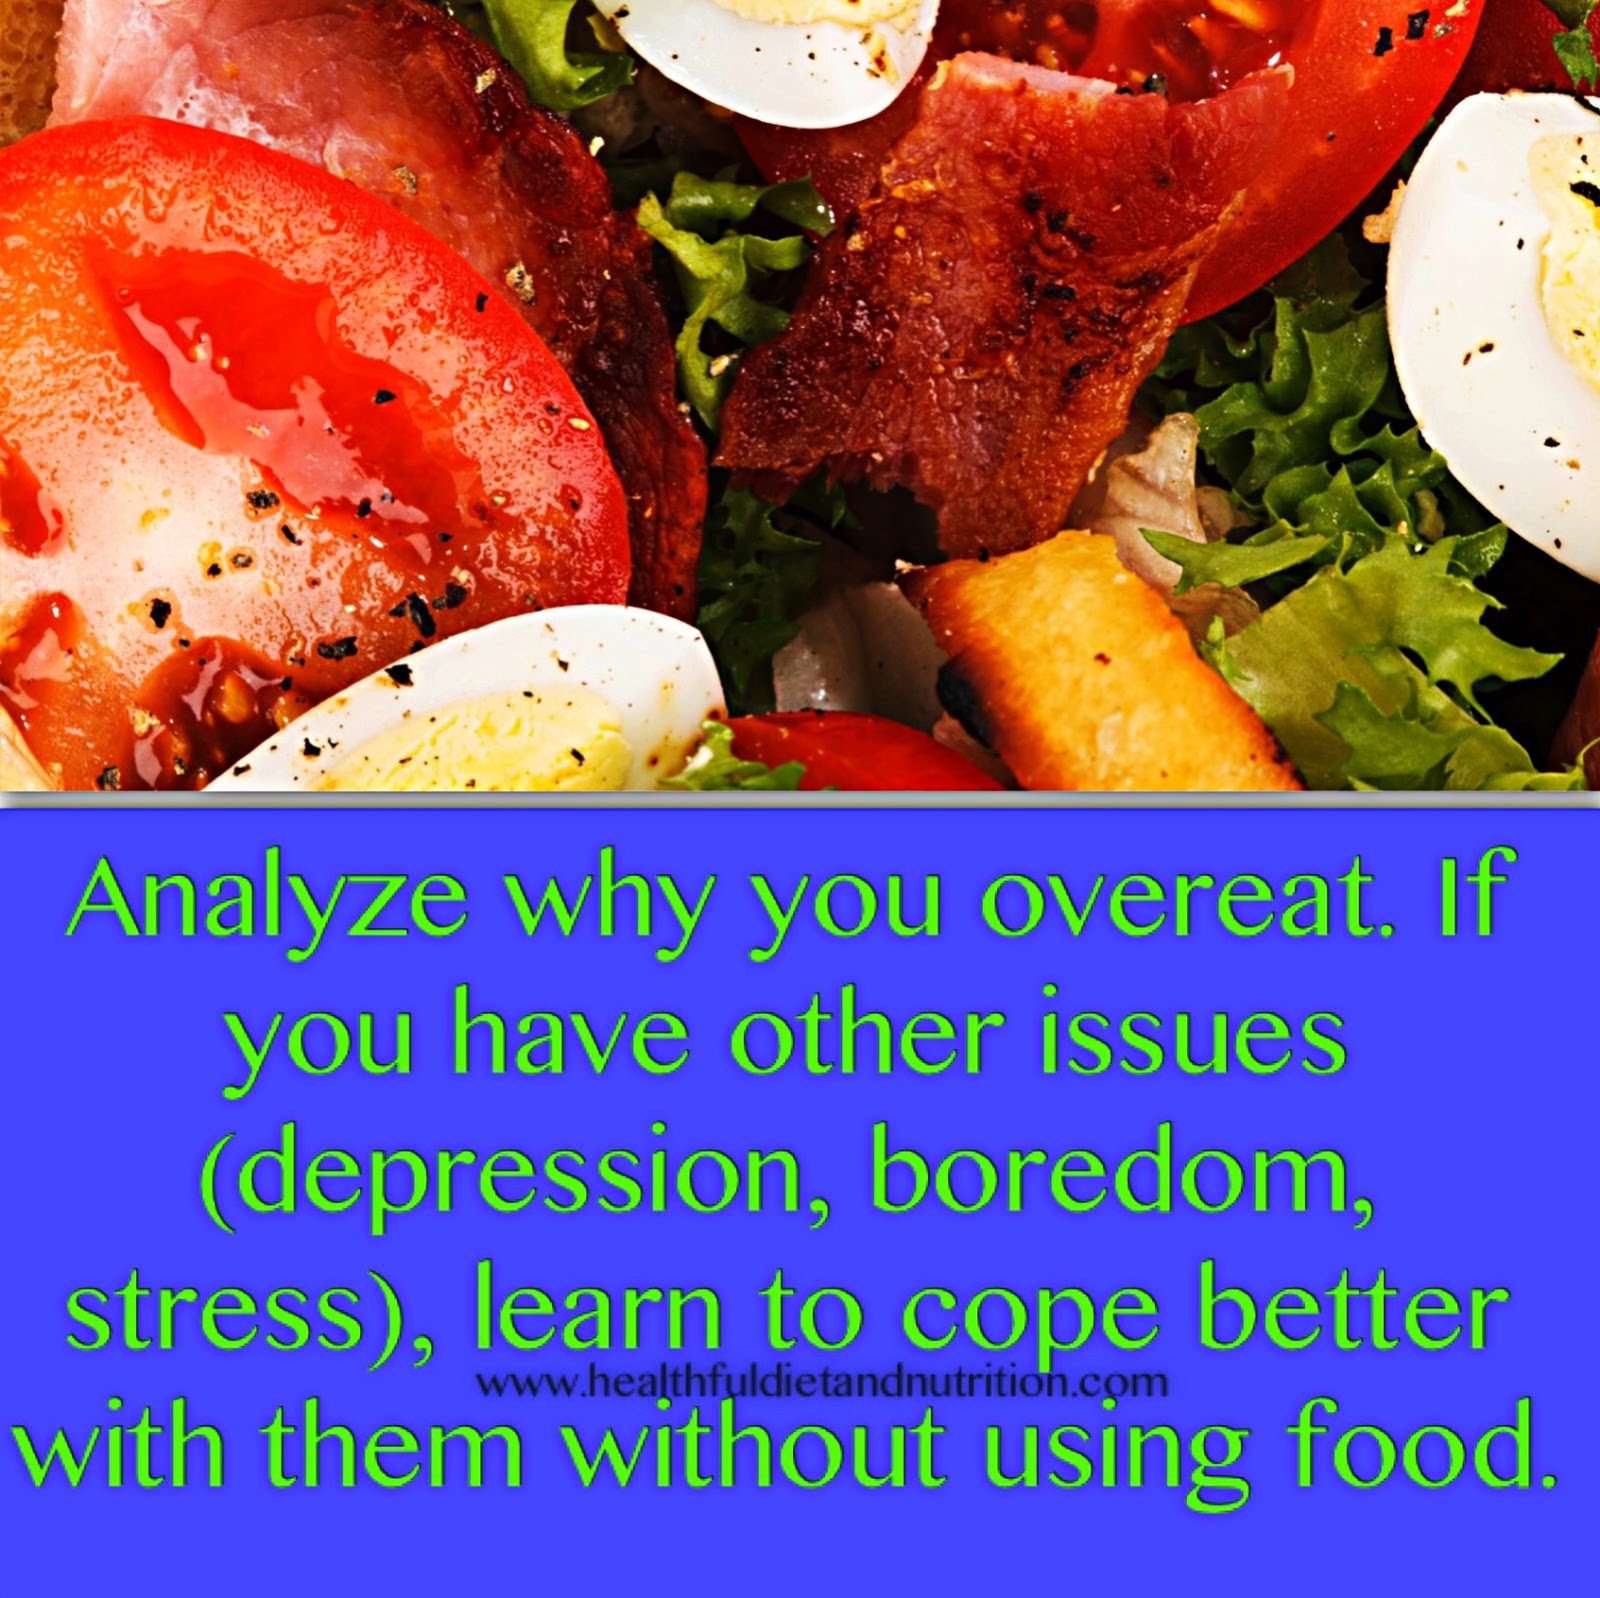 Learn To Cope Better Without Over-Eating